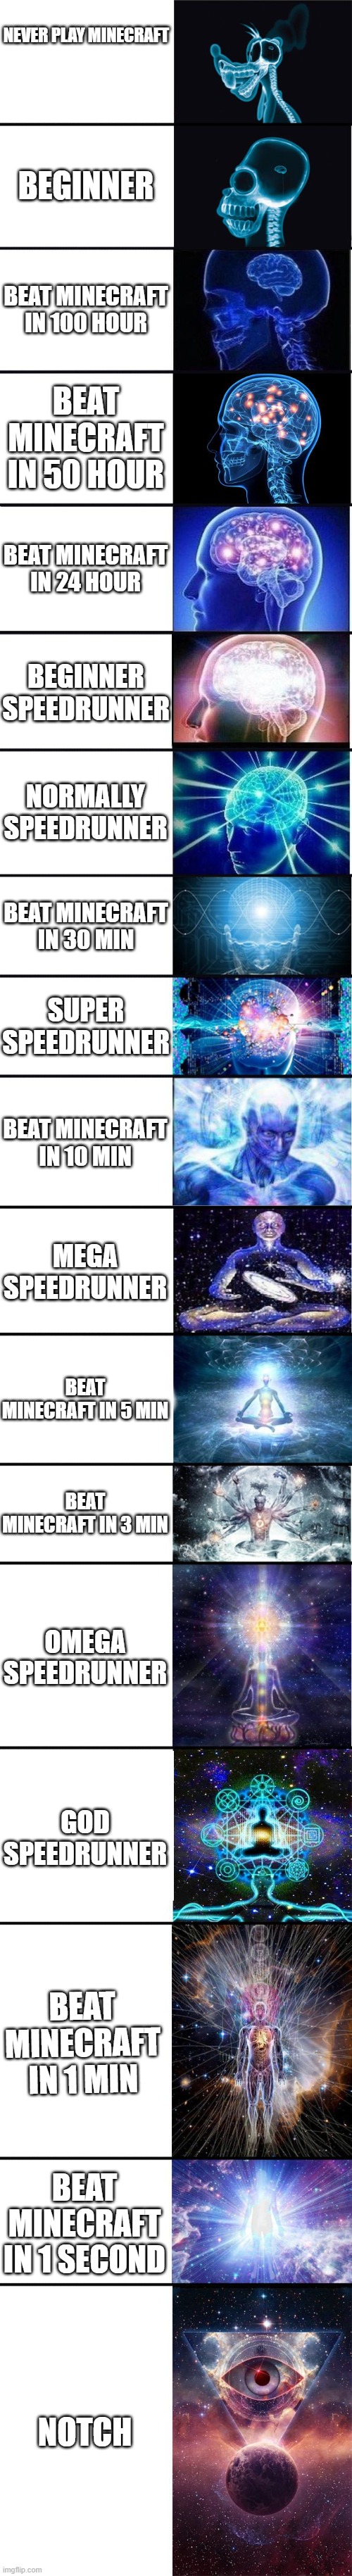 expanding brain: 9001 | NEVER PLAY MINECRAFT; BEGINNER; BEAT MINECRAFT IN 100 HOUR; BEAT MINECRAFT IN 50 HOUR; BEAT MINECRAFT IN 24 HOUR; BEGINNER SPEEDRUNNER; NORMALLY SPEEDRUNNER; BEAT MINECRAFT IN 30 MIN; SUPER SPEEDRUNNER; BEAT MINECRAFT IN 10 MIN; MEGA SPEEDRUNNER; BEAT MINECRAFT IN 5 MIN; BEAT MINECRAFT IN 3 MIN; OMEGA SPEEDRUNNER; GOD SPEEDRUNNER; BEAT MINECRAFT IN 1 MIN; BEAT MINECRAFT IN 1 SECOND; NOTCH | image tagged in expanding brain 9001 | made w/ Imgflip meme maker